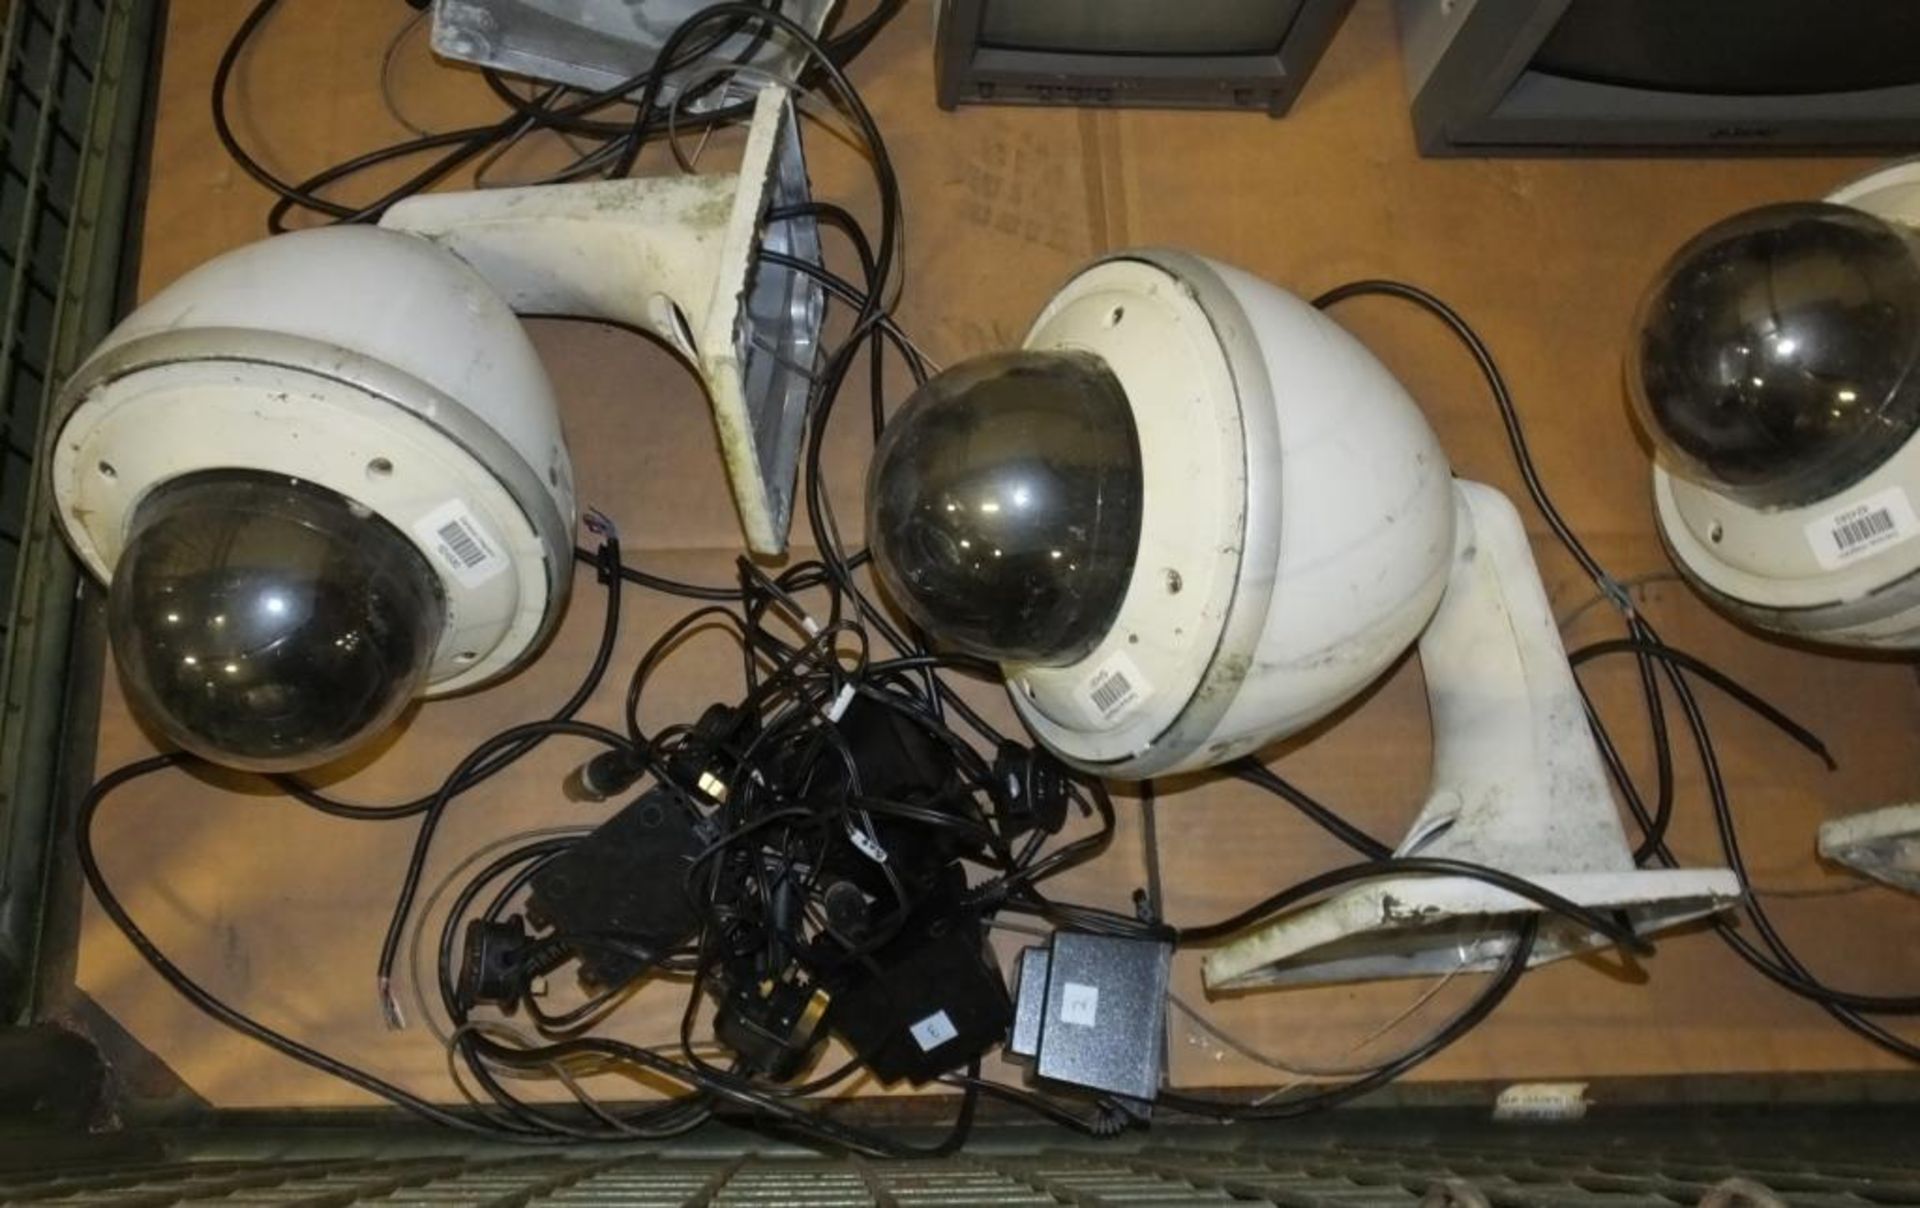 4 Large Outdoor Security Cameras & 2 Monitors - Image 3 of 3